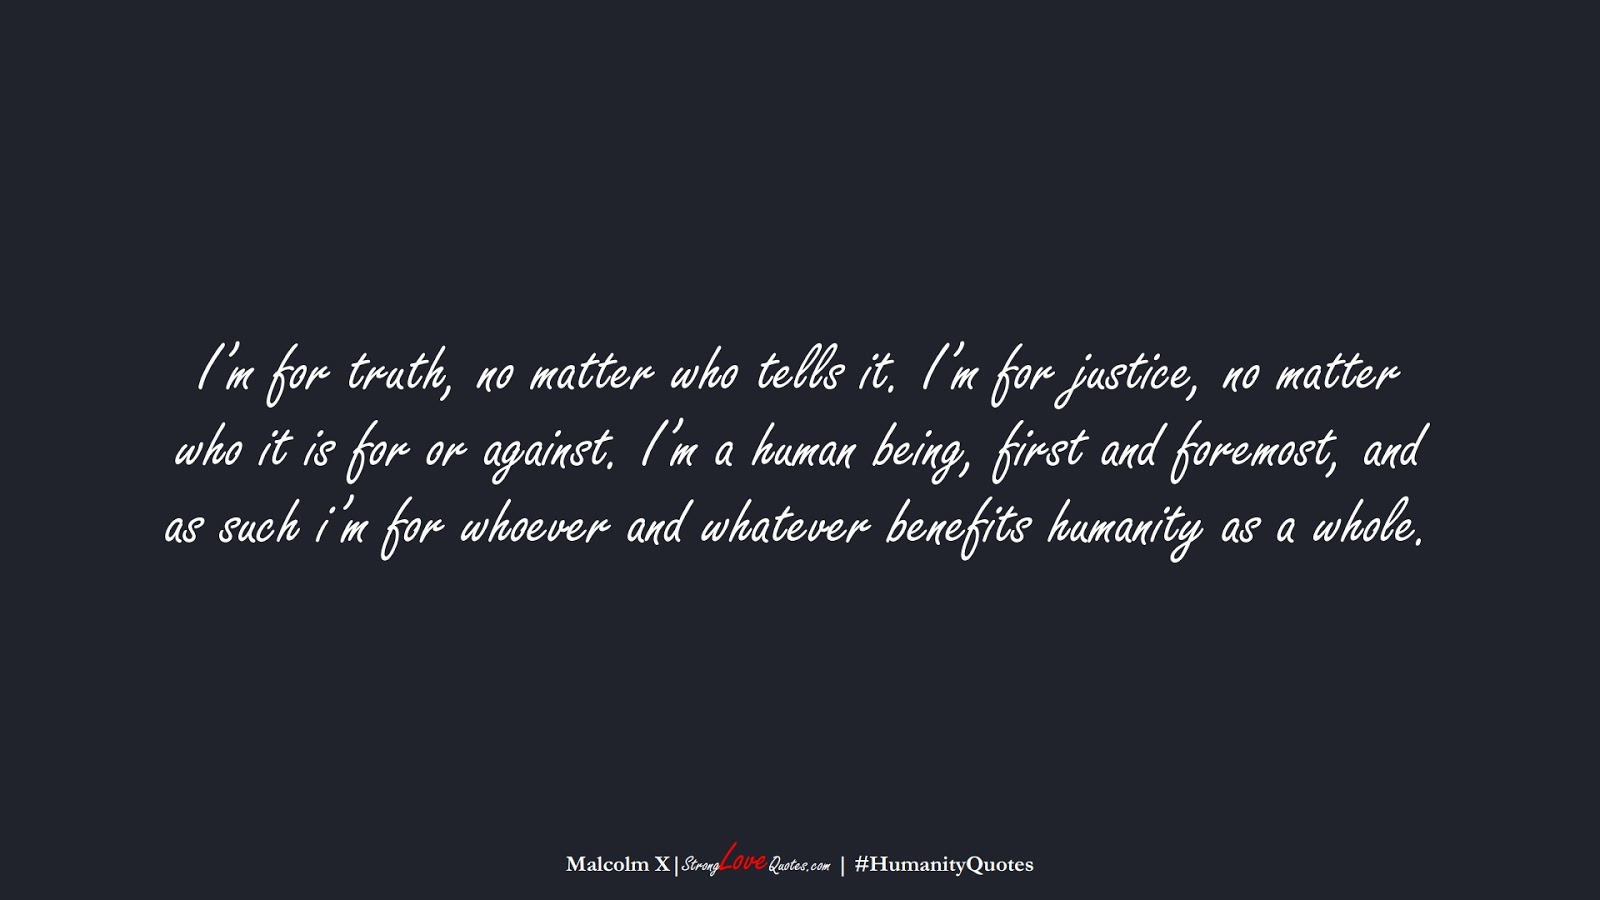 I’m for truth, no matter who tells it. I’m for justice, no matter who it is for or against. I’m a human being, first and foremost, and as such i’m for whoever and whatever benefits humanity as a whole. (Malcolm X);  #HumanityQuotes